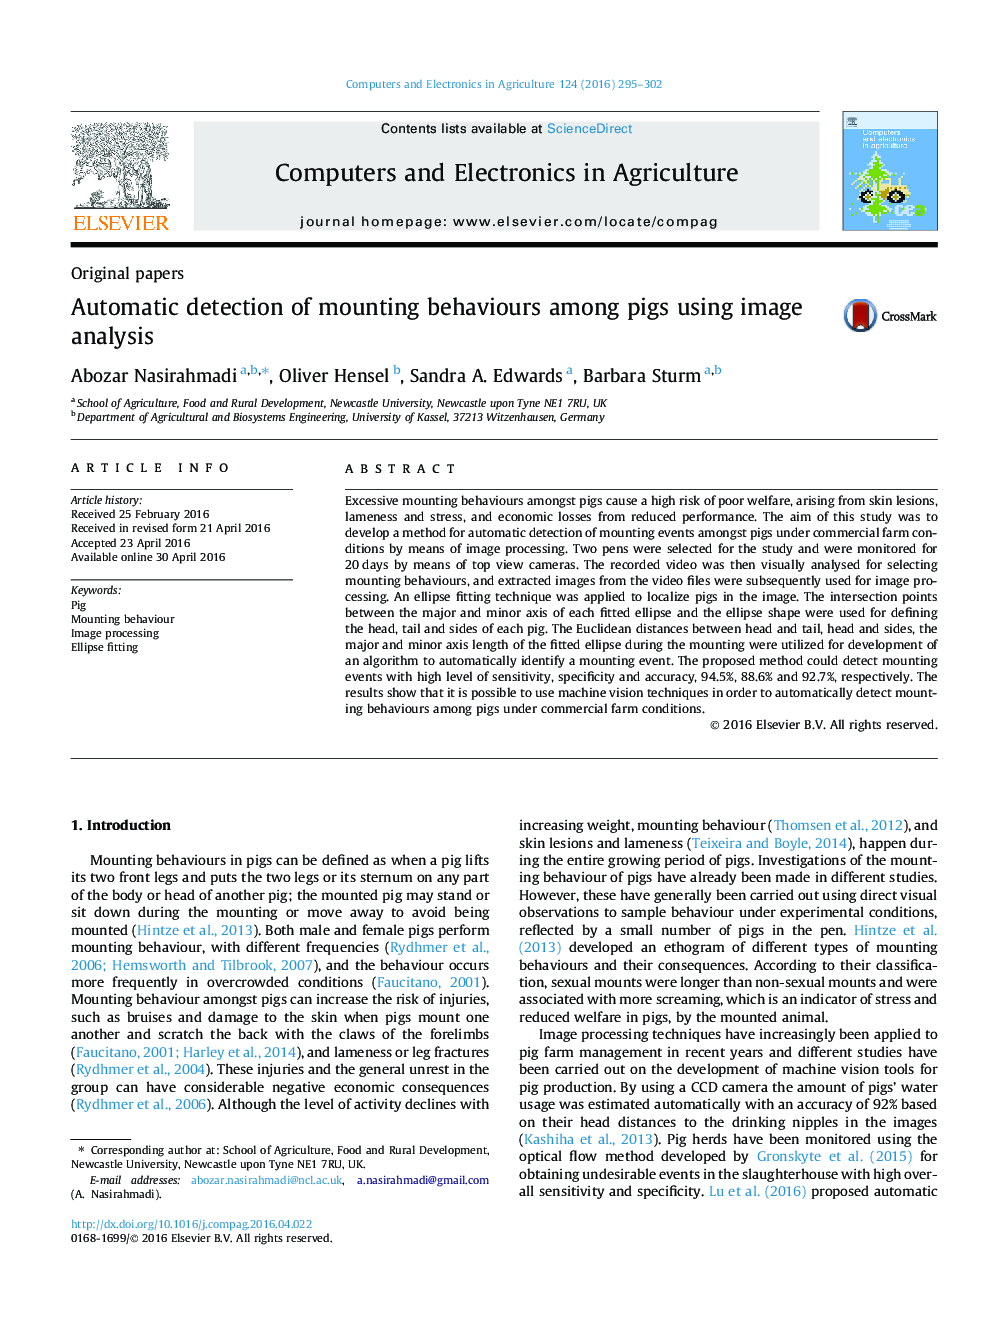 Automatic detection of mounting behaviours among pigs using image analysis